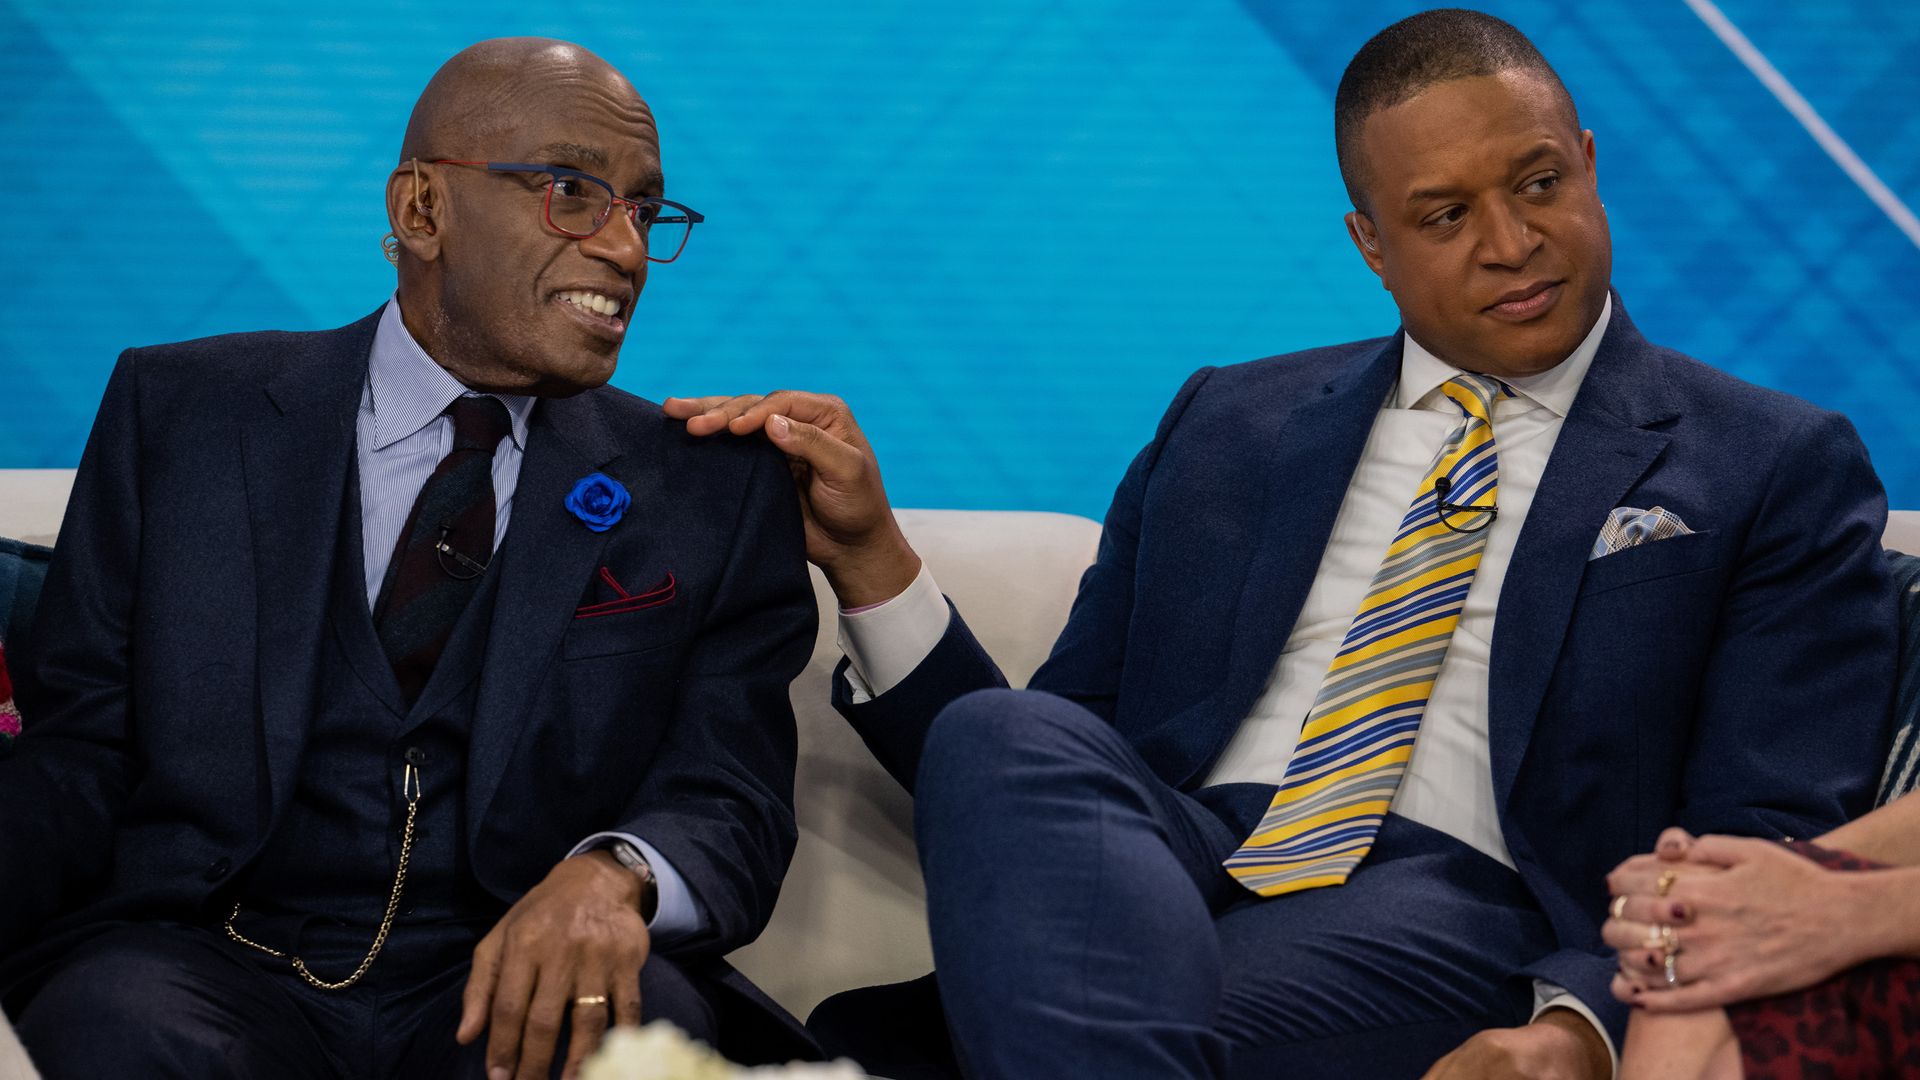 Today Show stars Al Roker and Craig Melvin sitting in the NBC studios